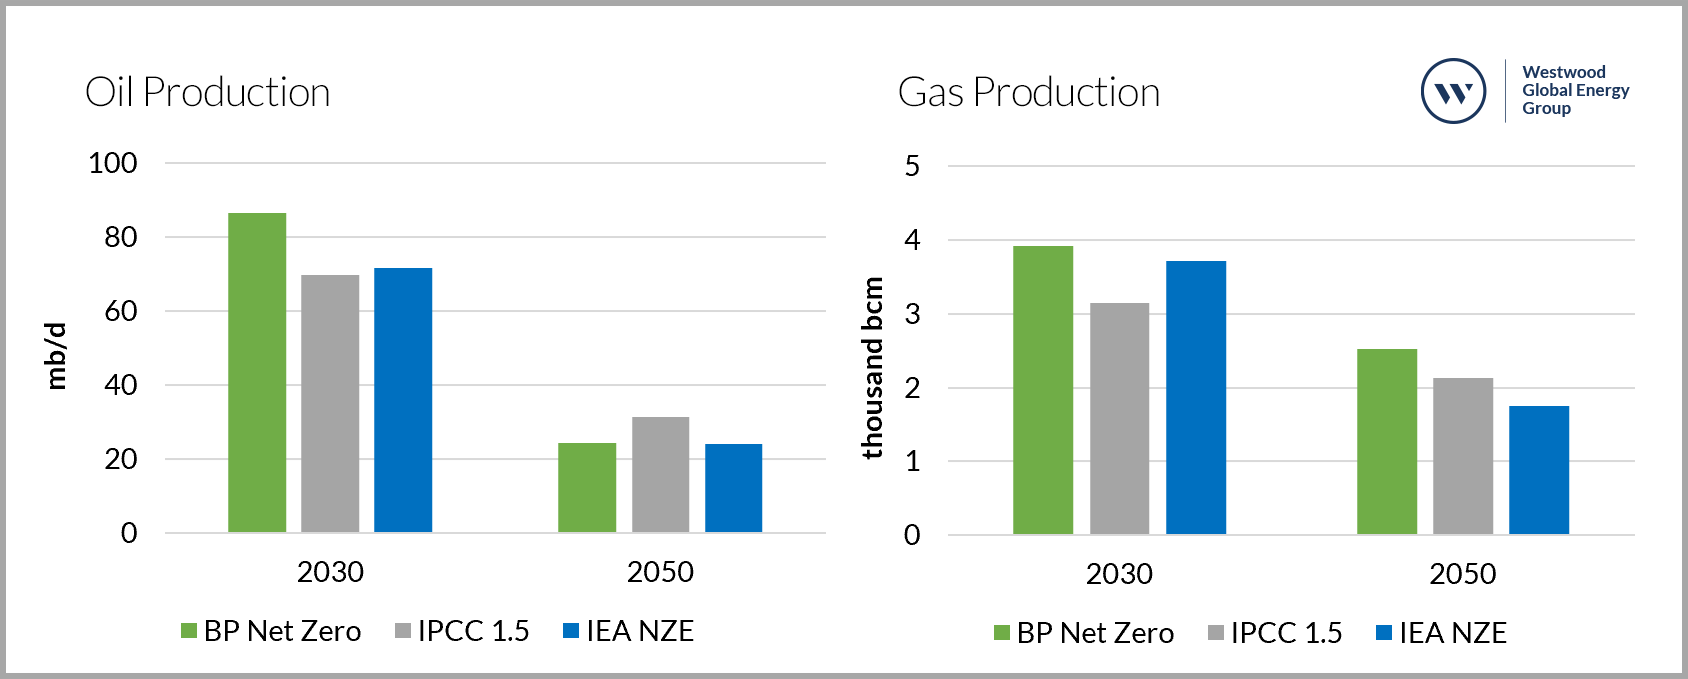 Oil and Natural Gas production outlooks under different net zero 2050 scenarios